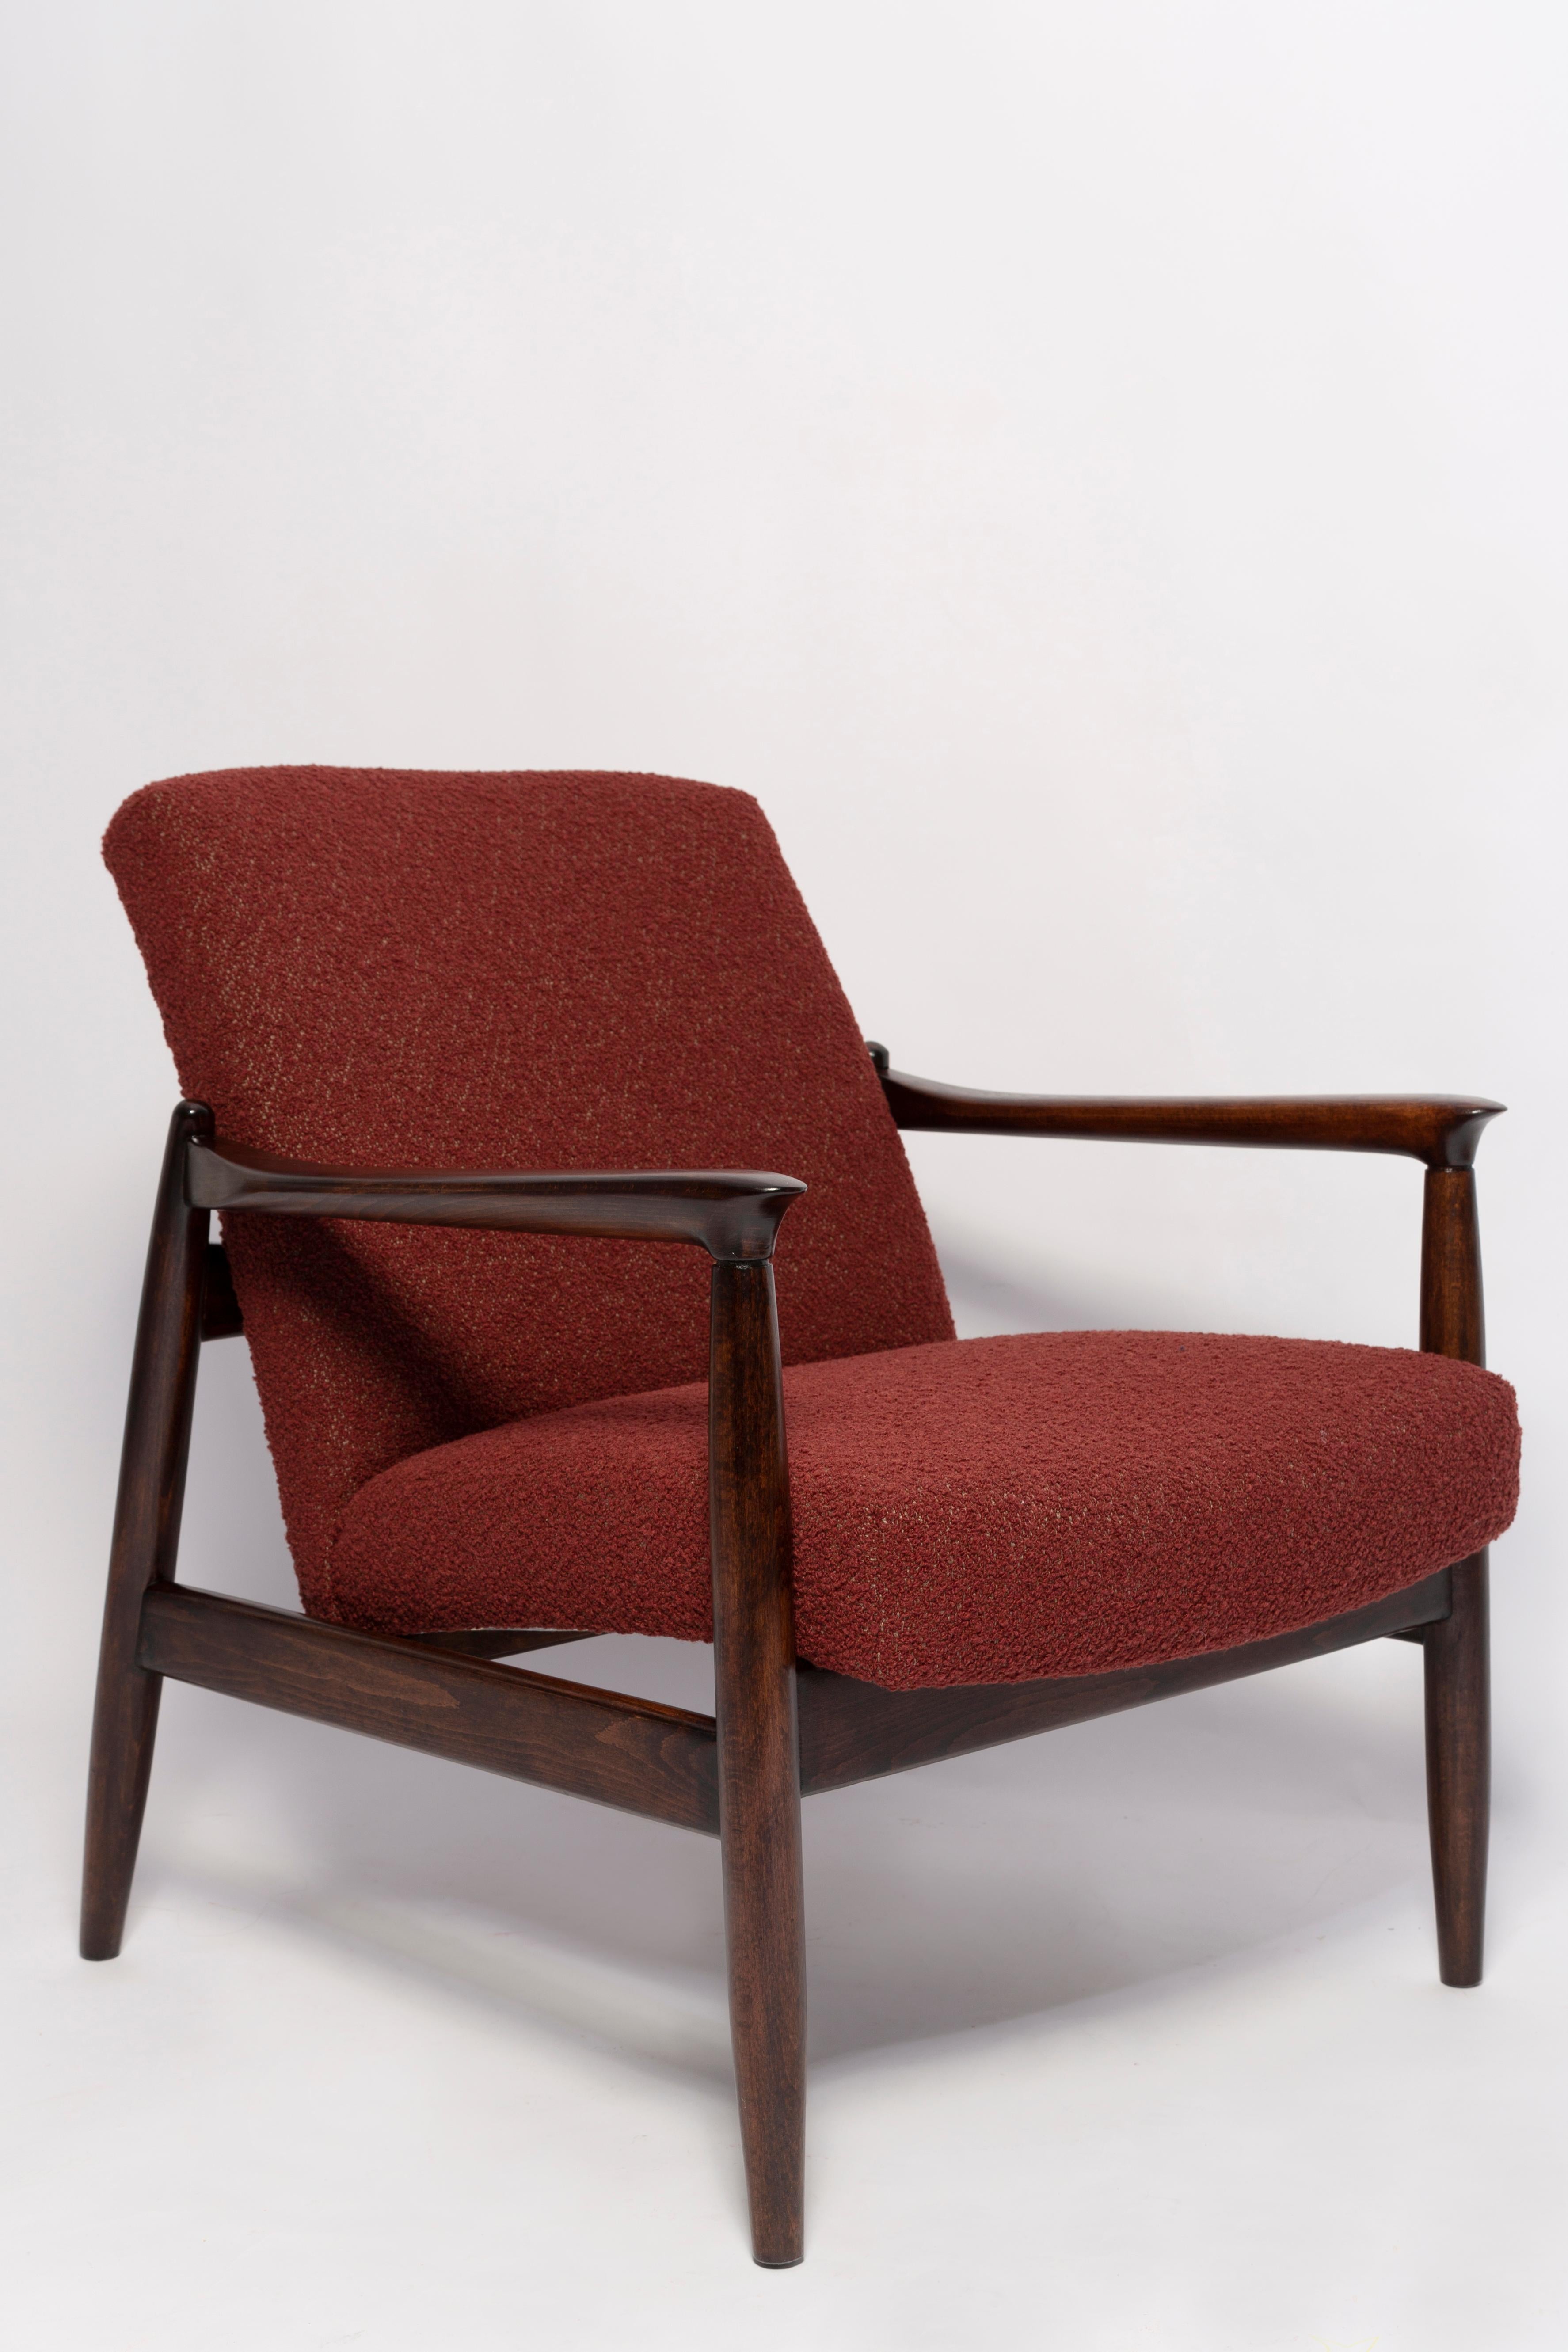 A beautiful mid-century armchair GFM-142, designed by Edmund Homa. The armchair was made in the 1960s in the Gosciecinska Furniture Factory. Made from solid beech wood. 

The GFM-142 armchair is regarded one of the best Polish armchair design from